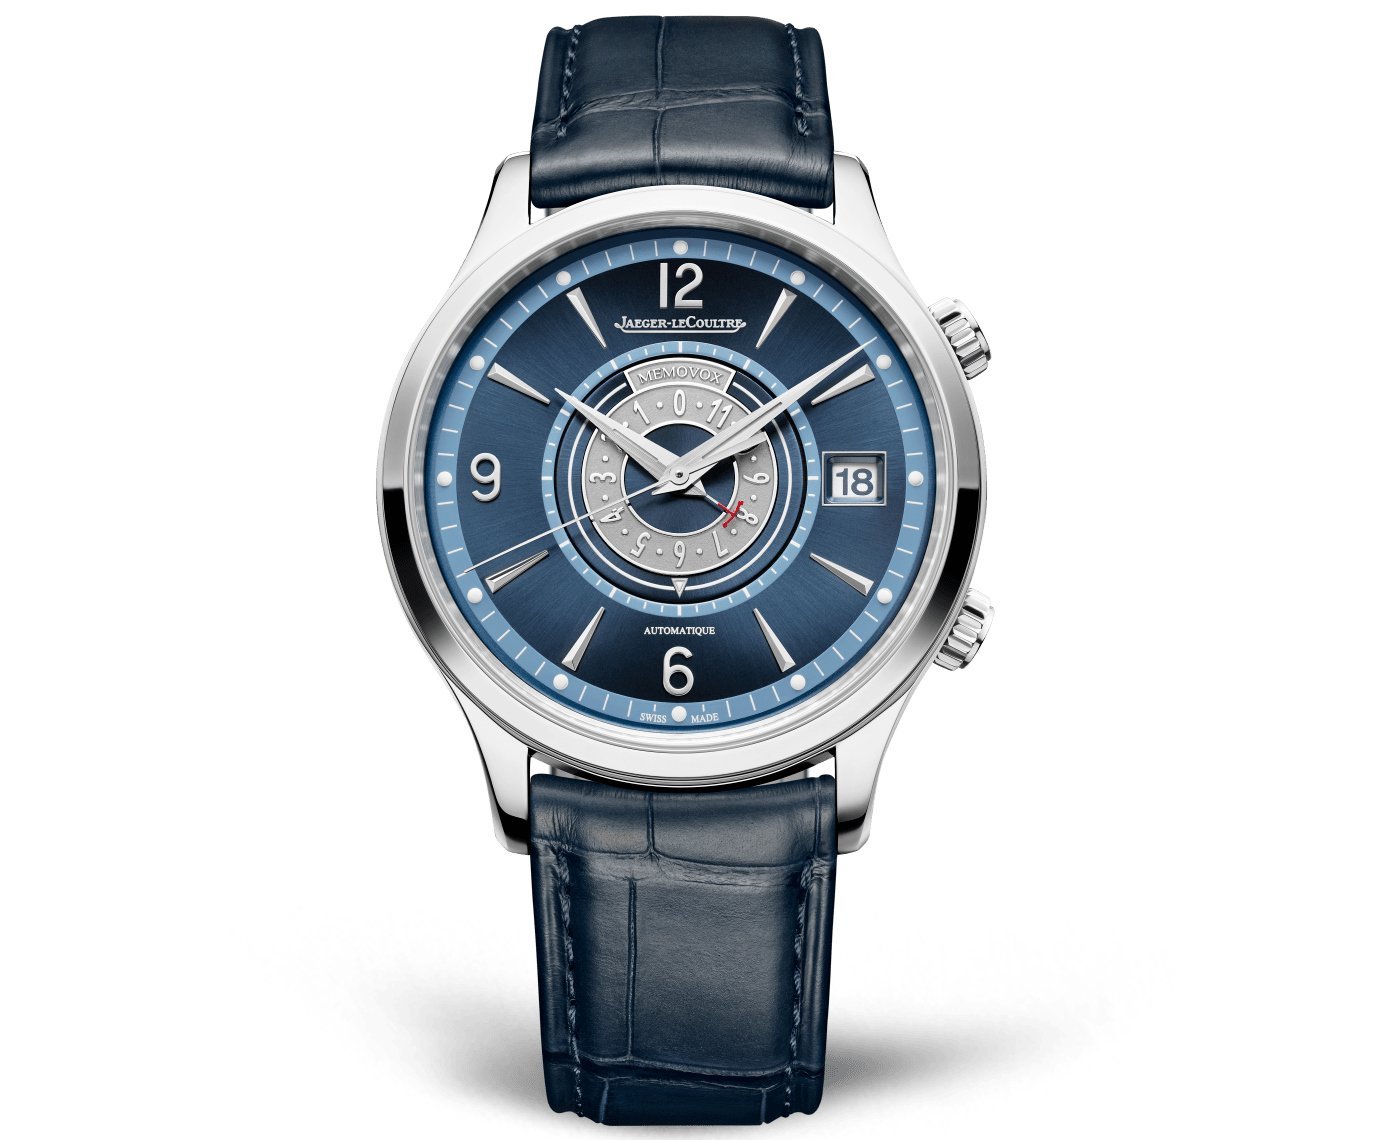 Jaeger-LeCoultre introduces two new Memovox models